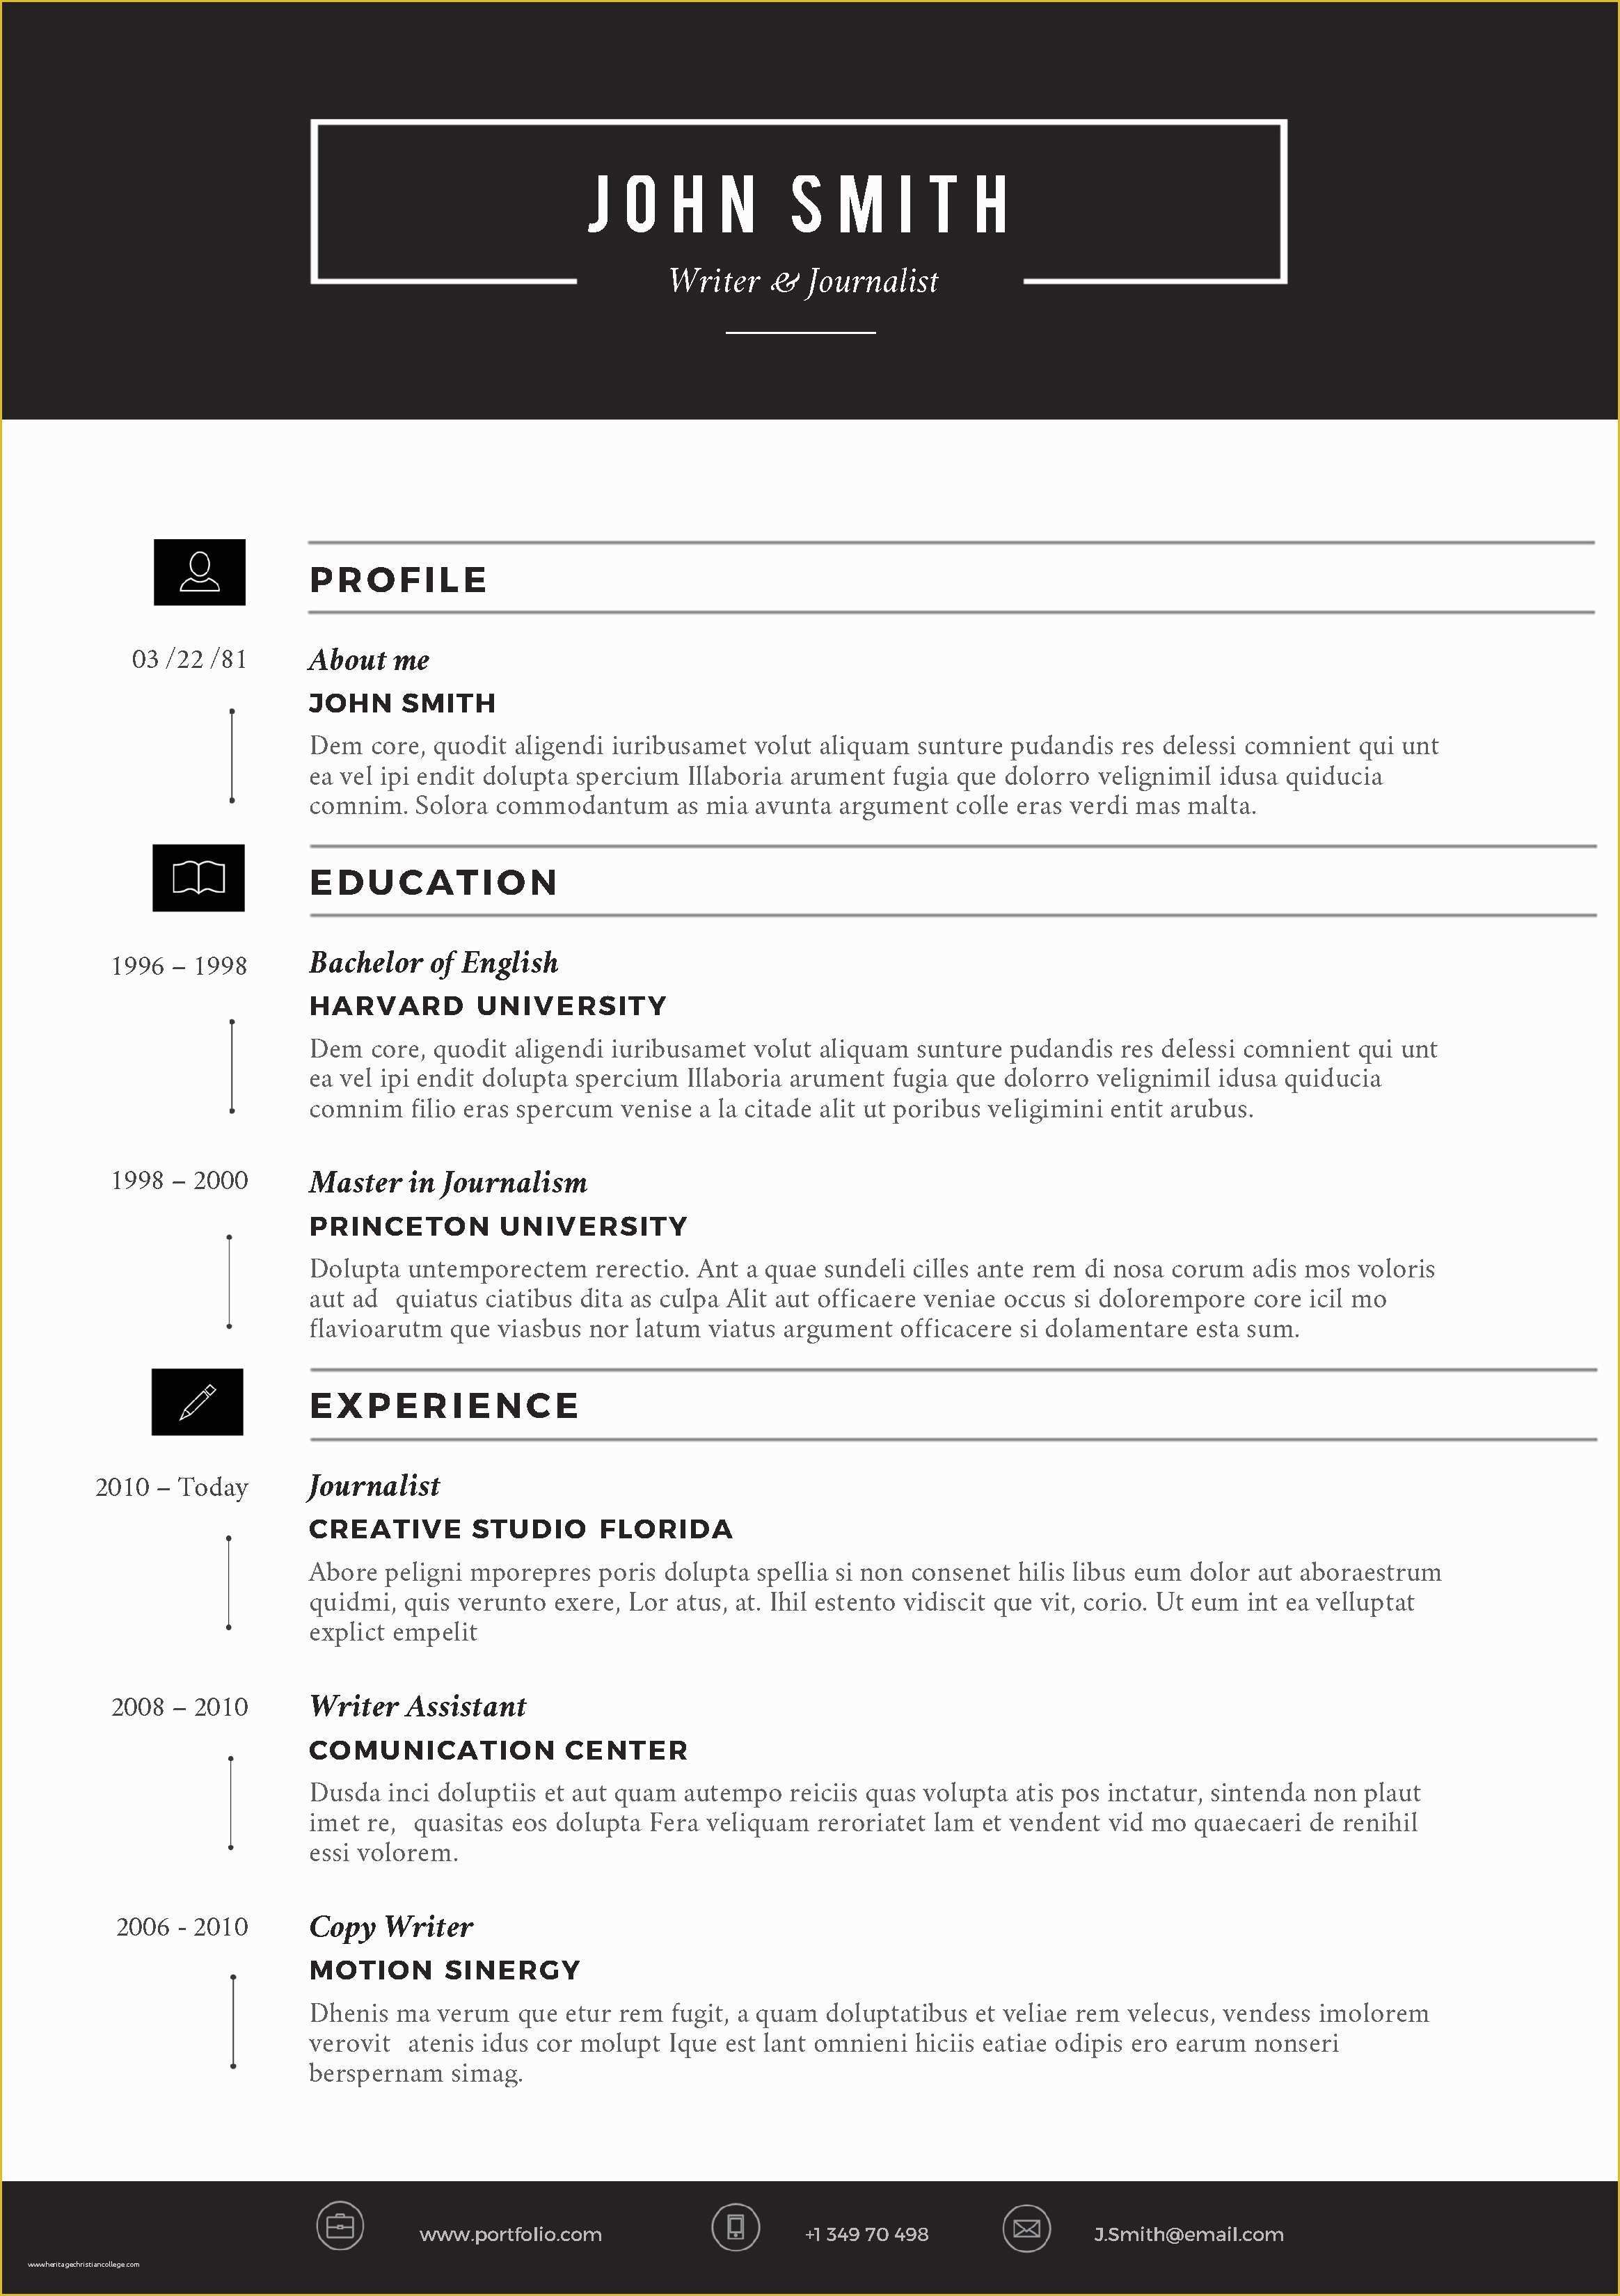 download resume templates for free microsoft word